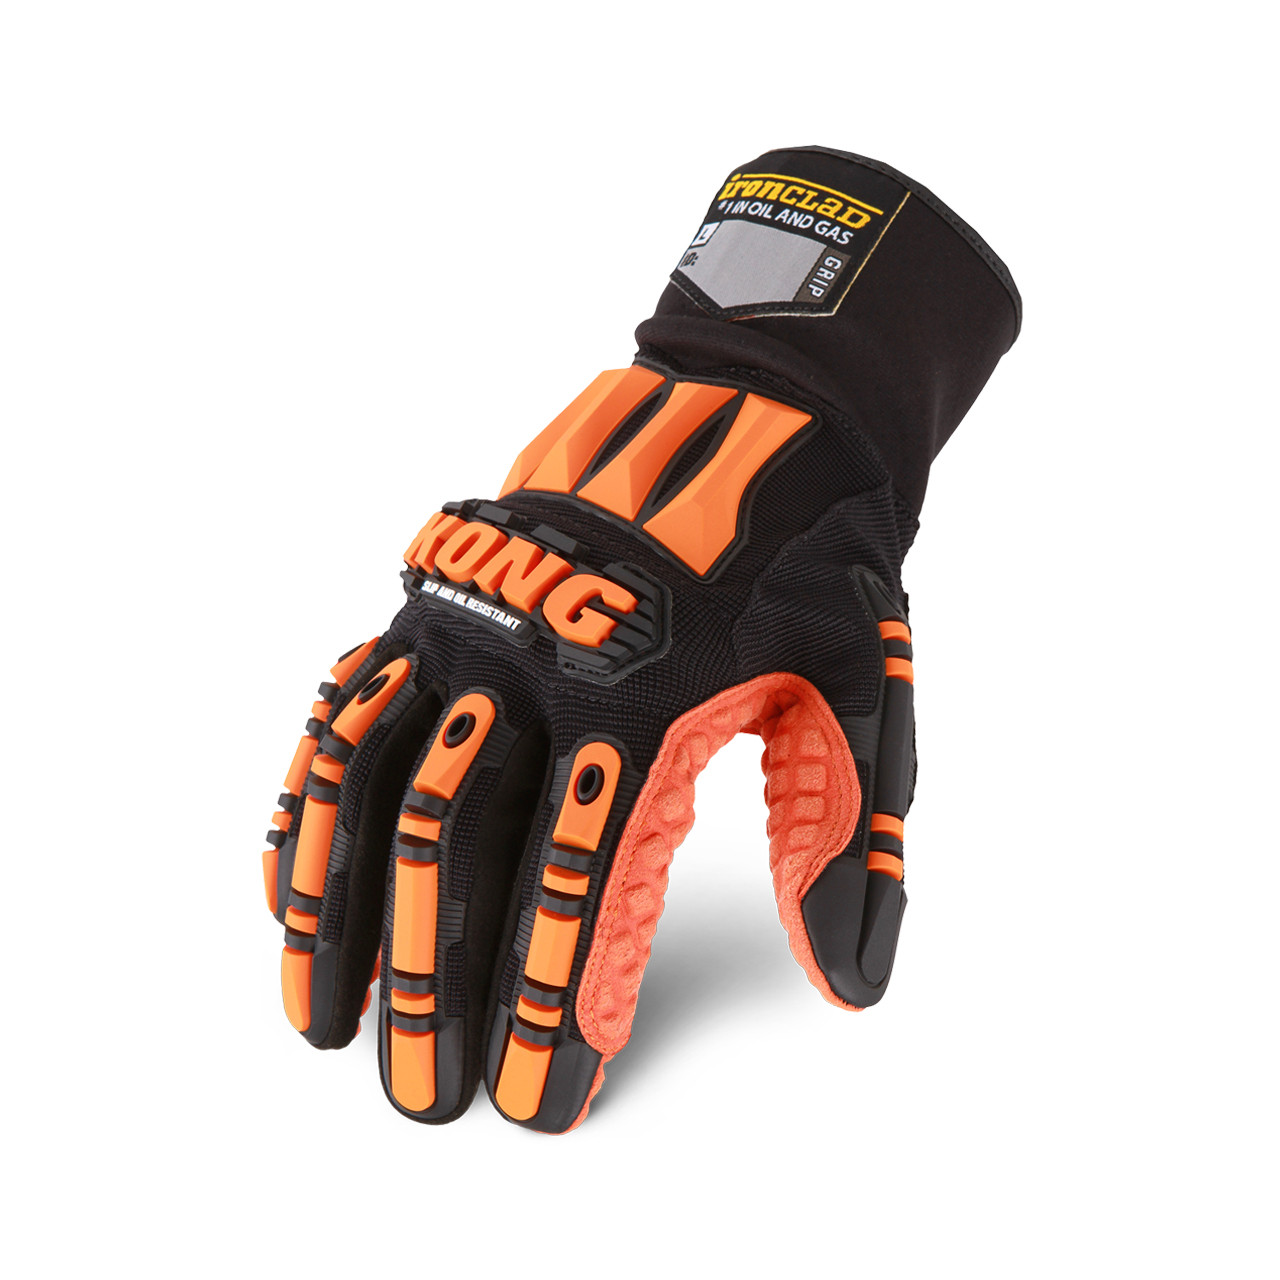 Kong Impact Gloves with Oil Resistance, Ironclad Kong Impact Gloves